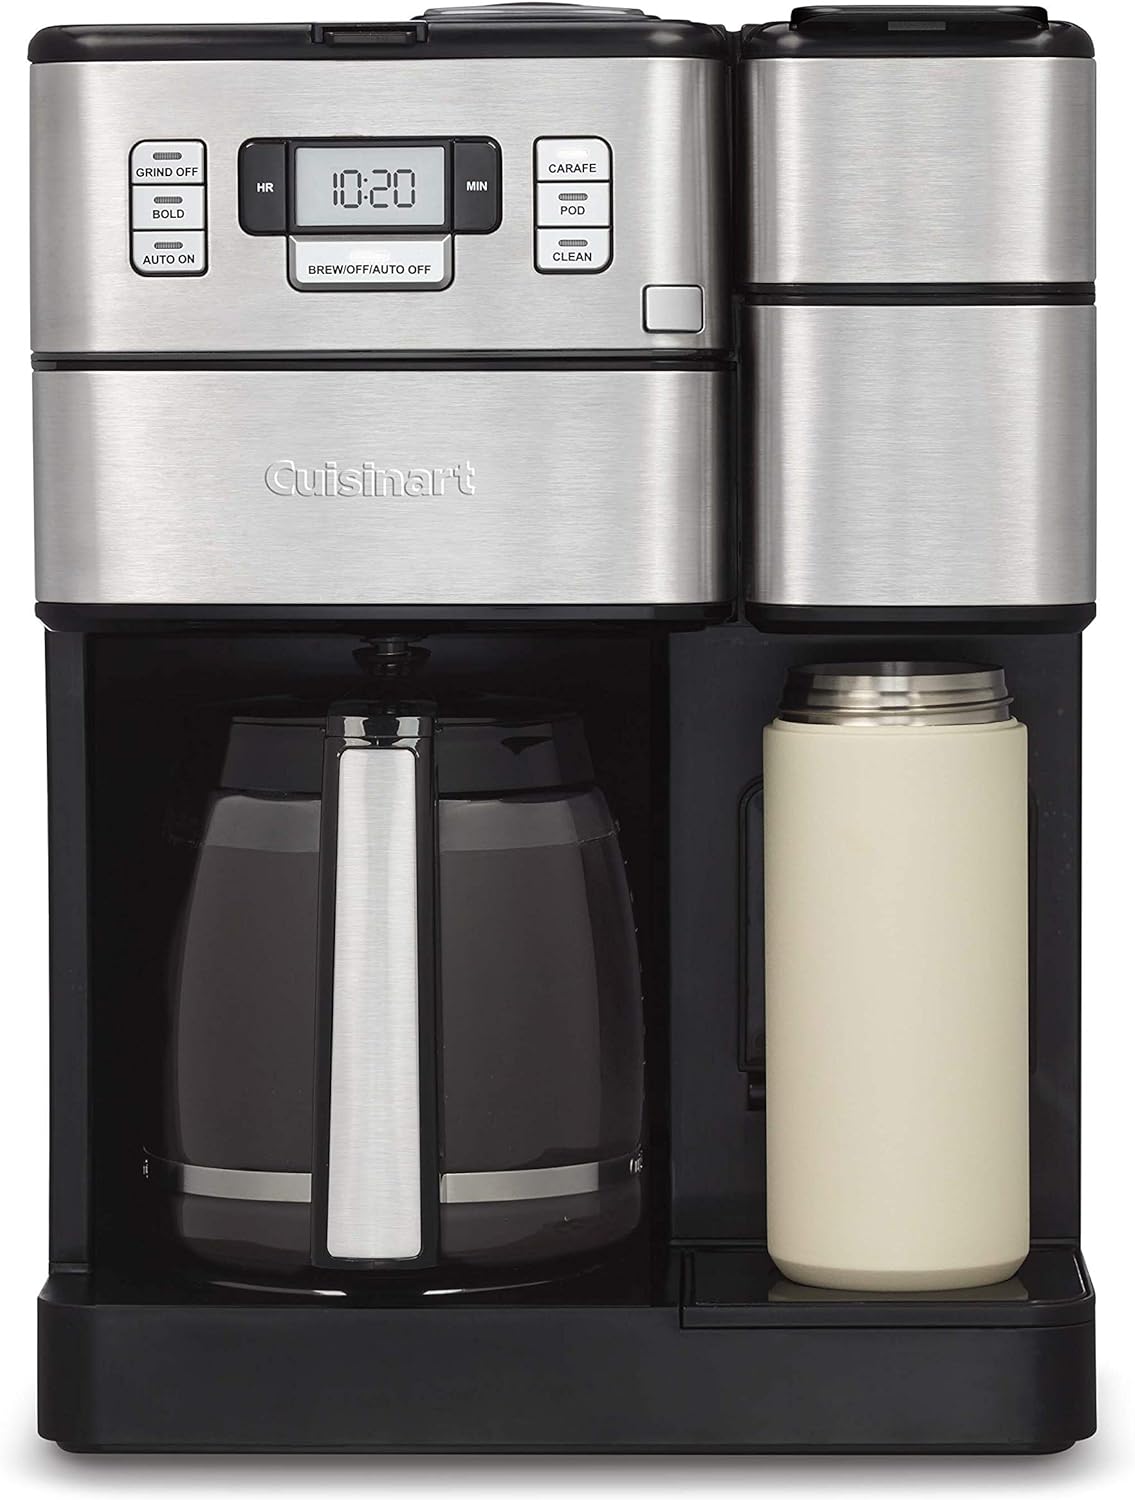 Cuisinart SS-GB1 Coffee Center Grind and Brew Plus, Built-in Coffee Grinder